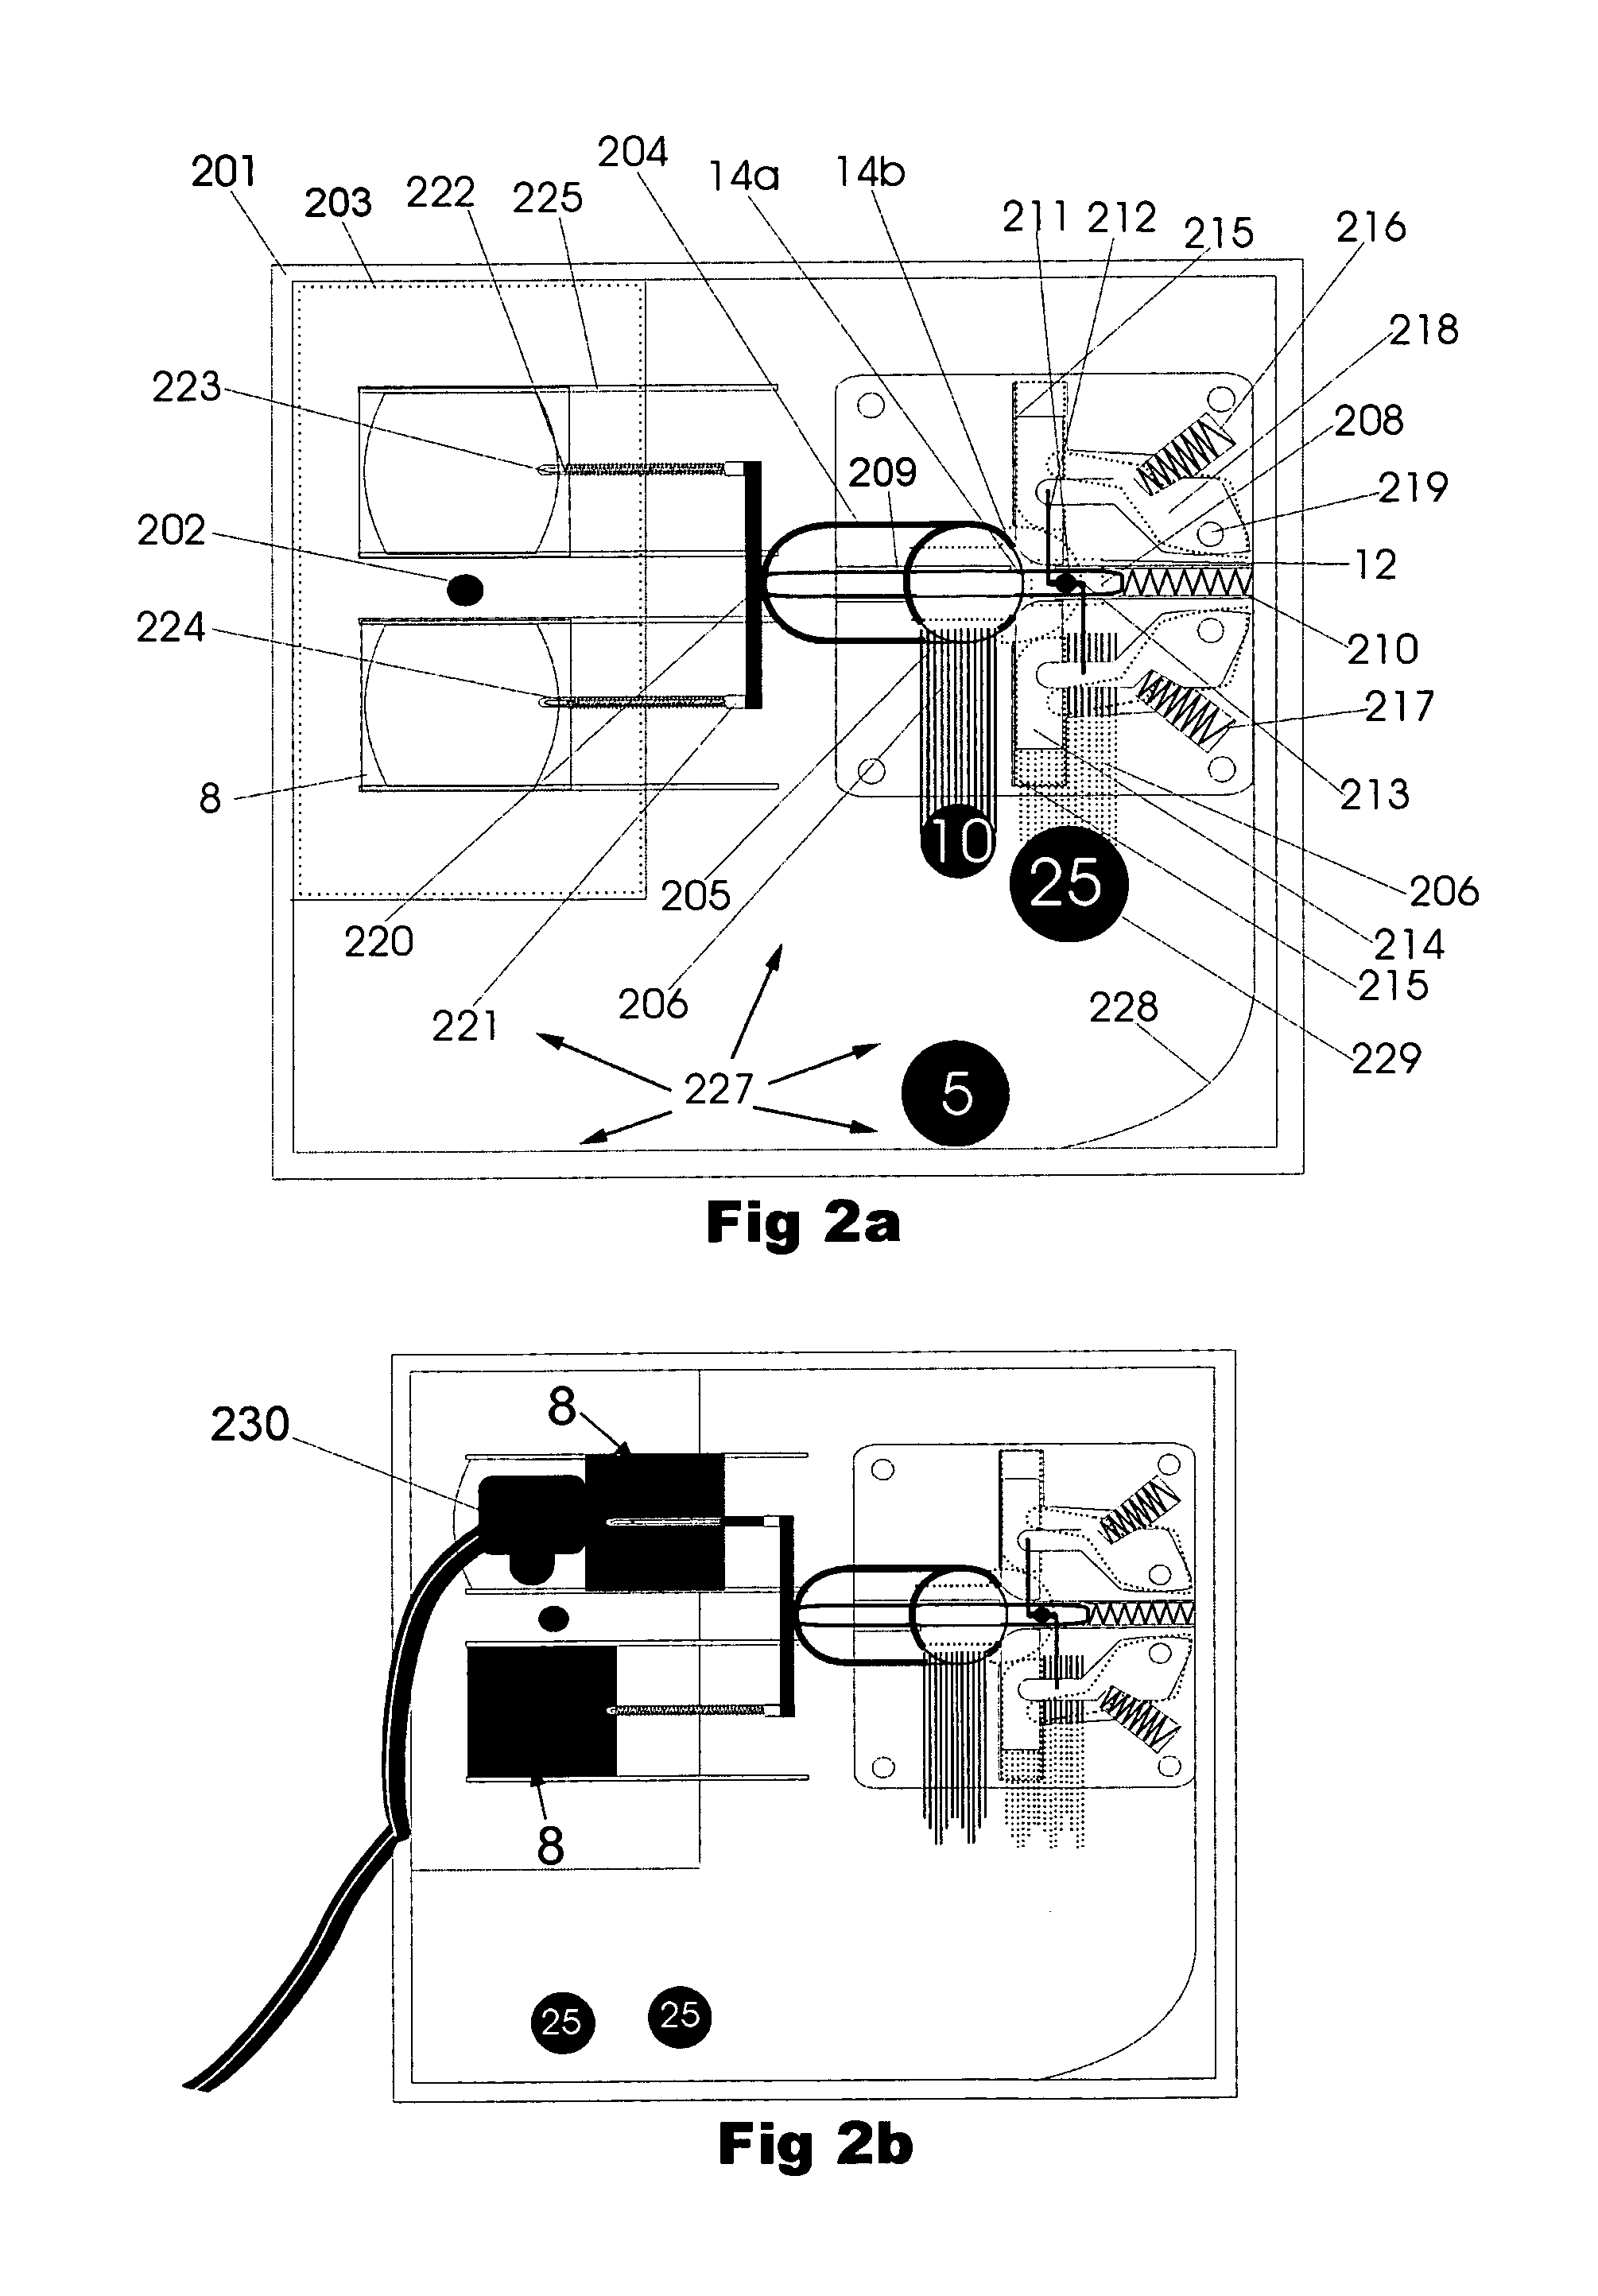 Apparatus for utility outlet control